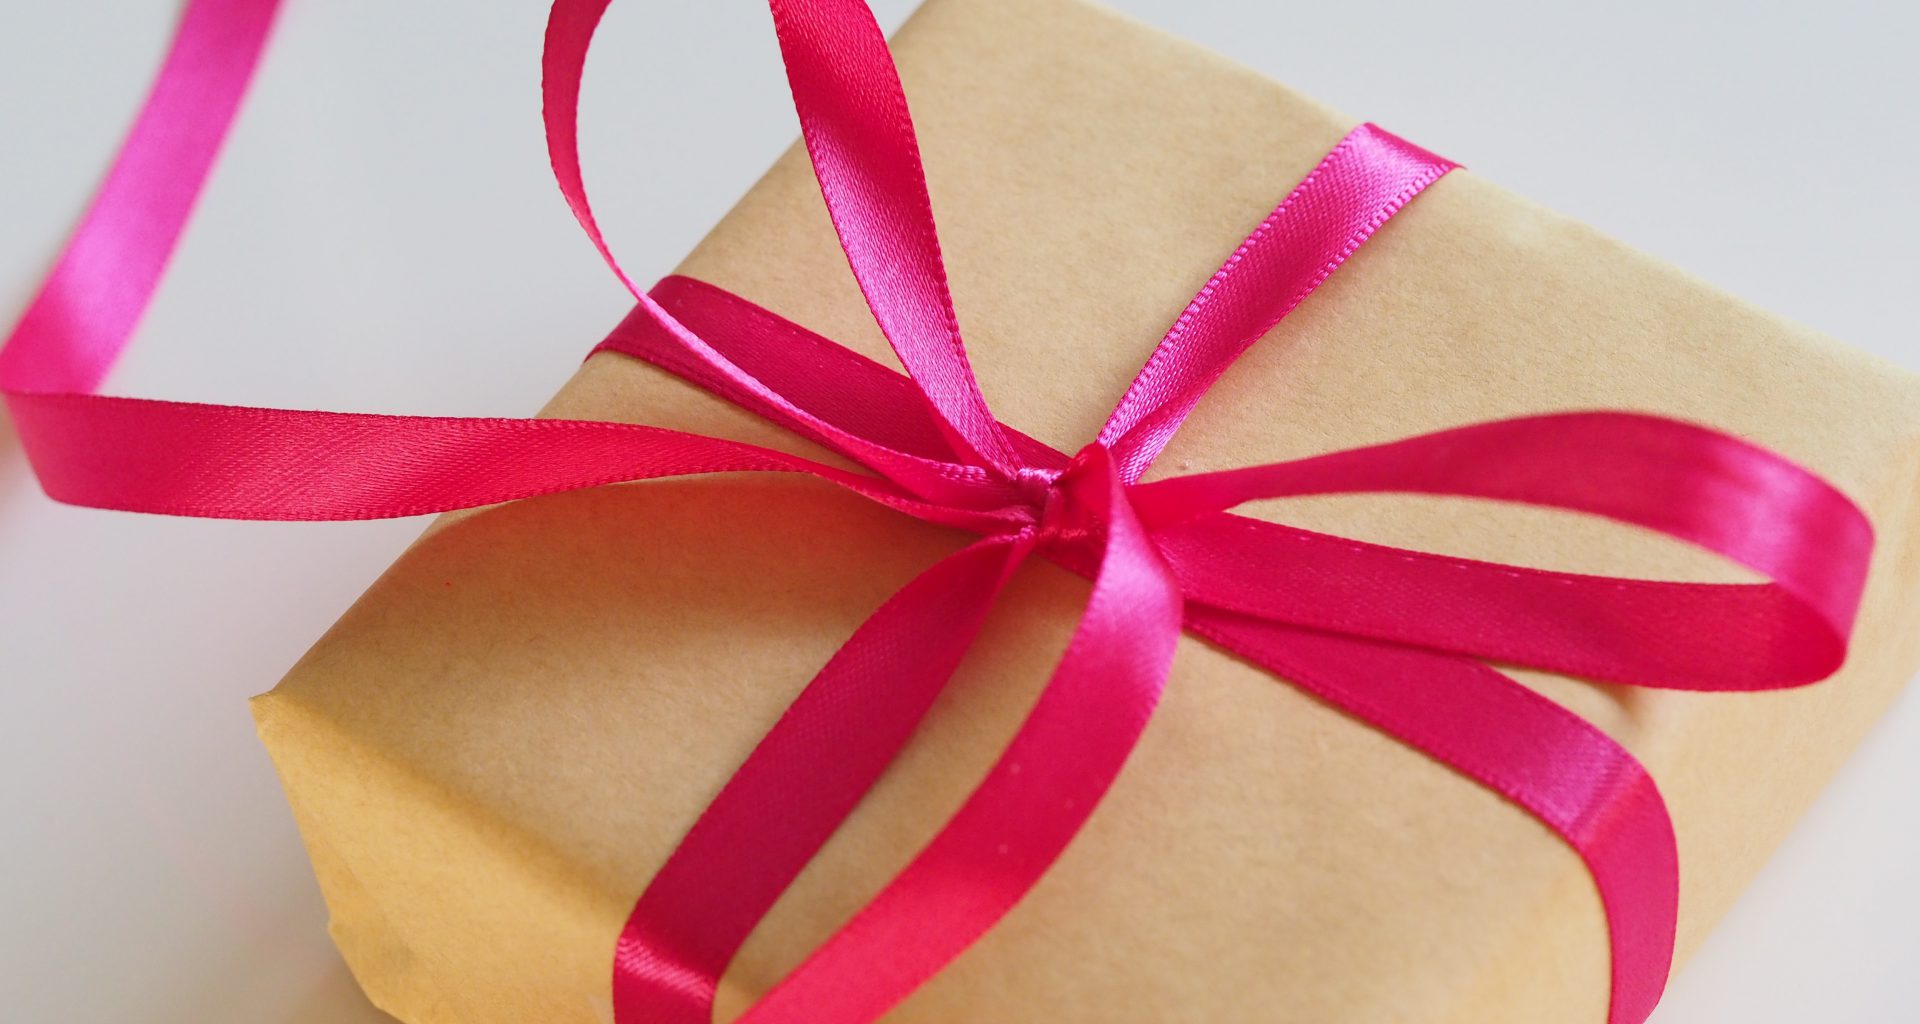 brown gift box with pink ribbon